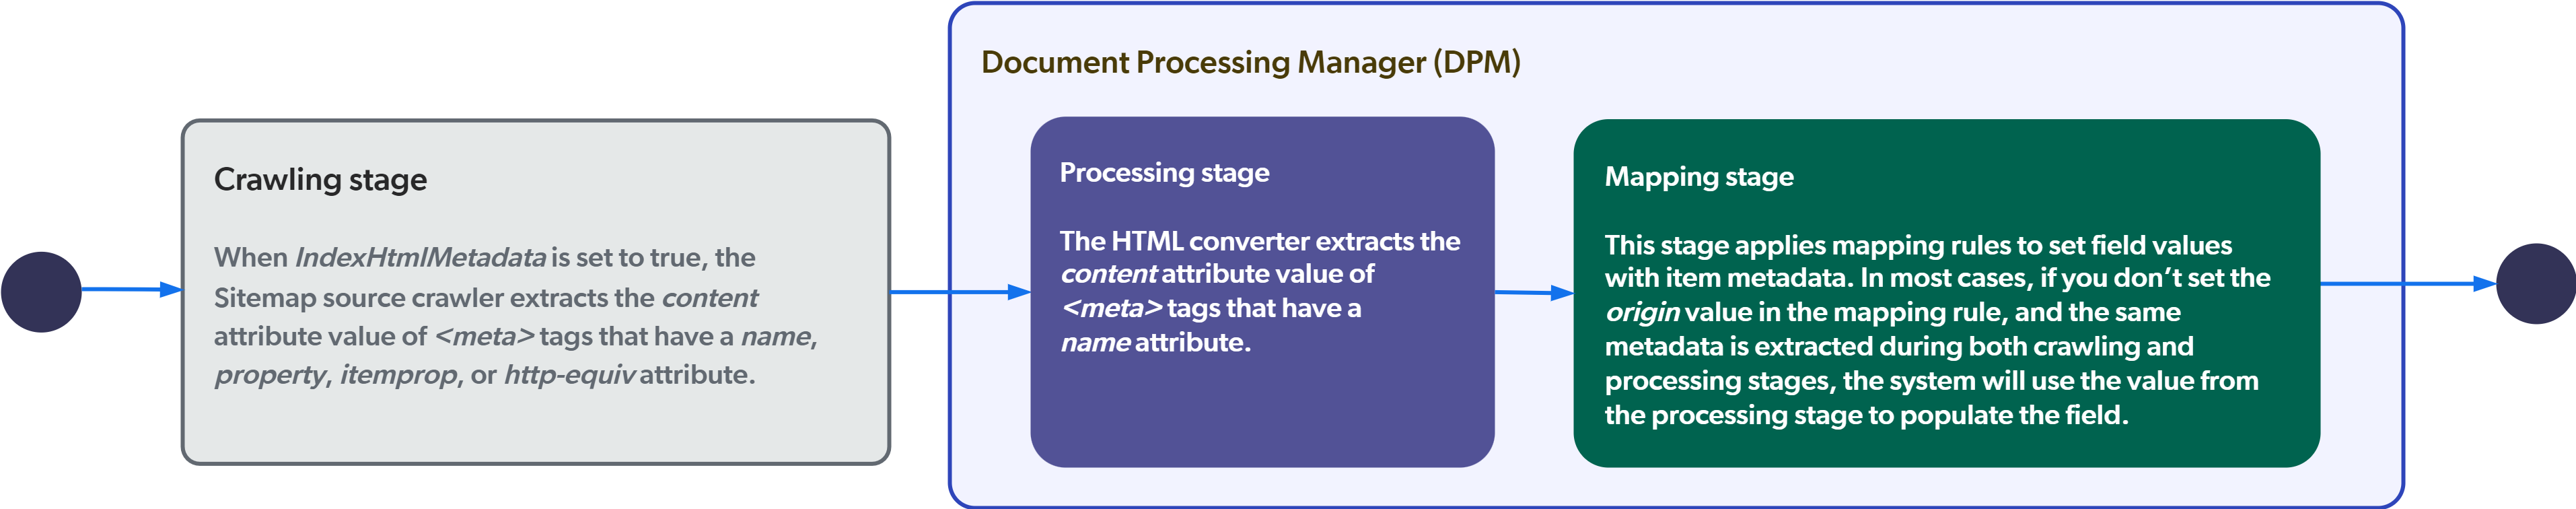 Simplified view of the Sitemap source indexing process